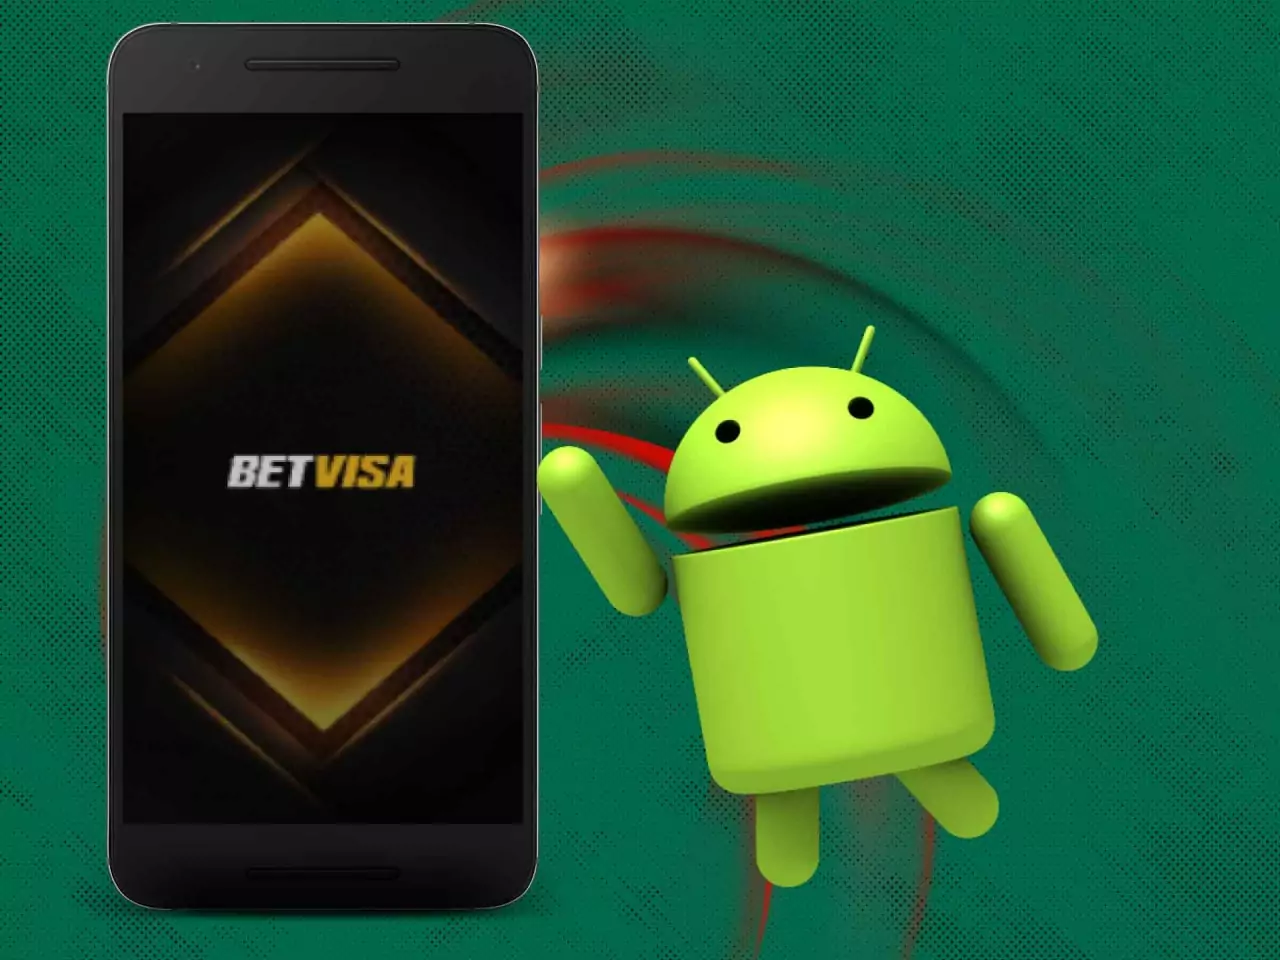 Downloadn the Betvisa application on your Android smartphone.